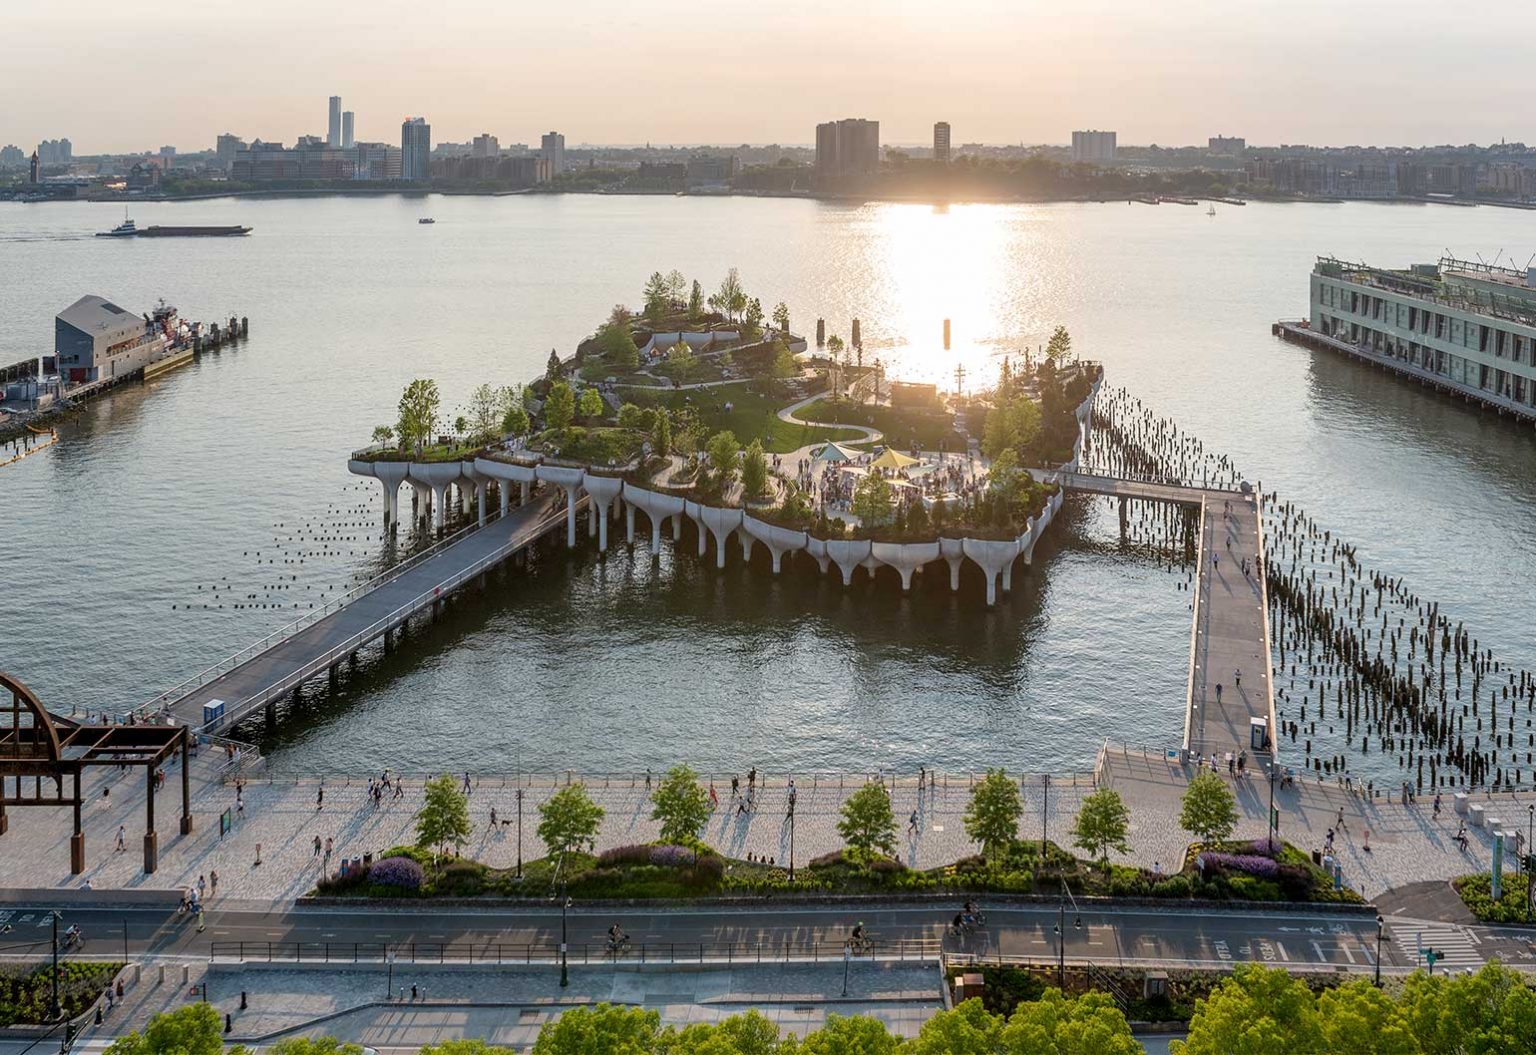 How innovative engineering helped build a new island in New York - Create